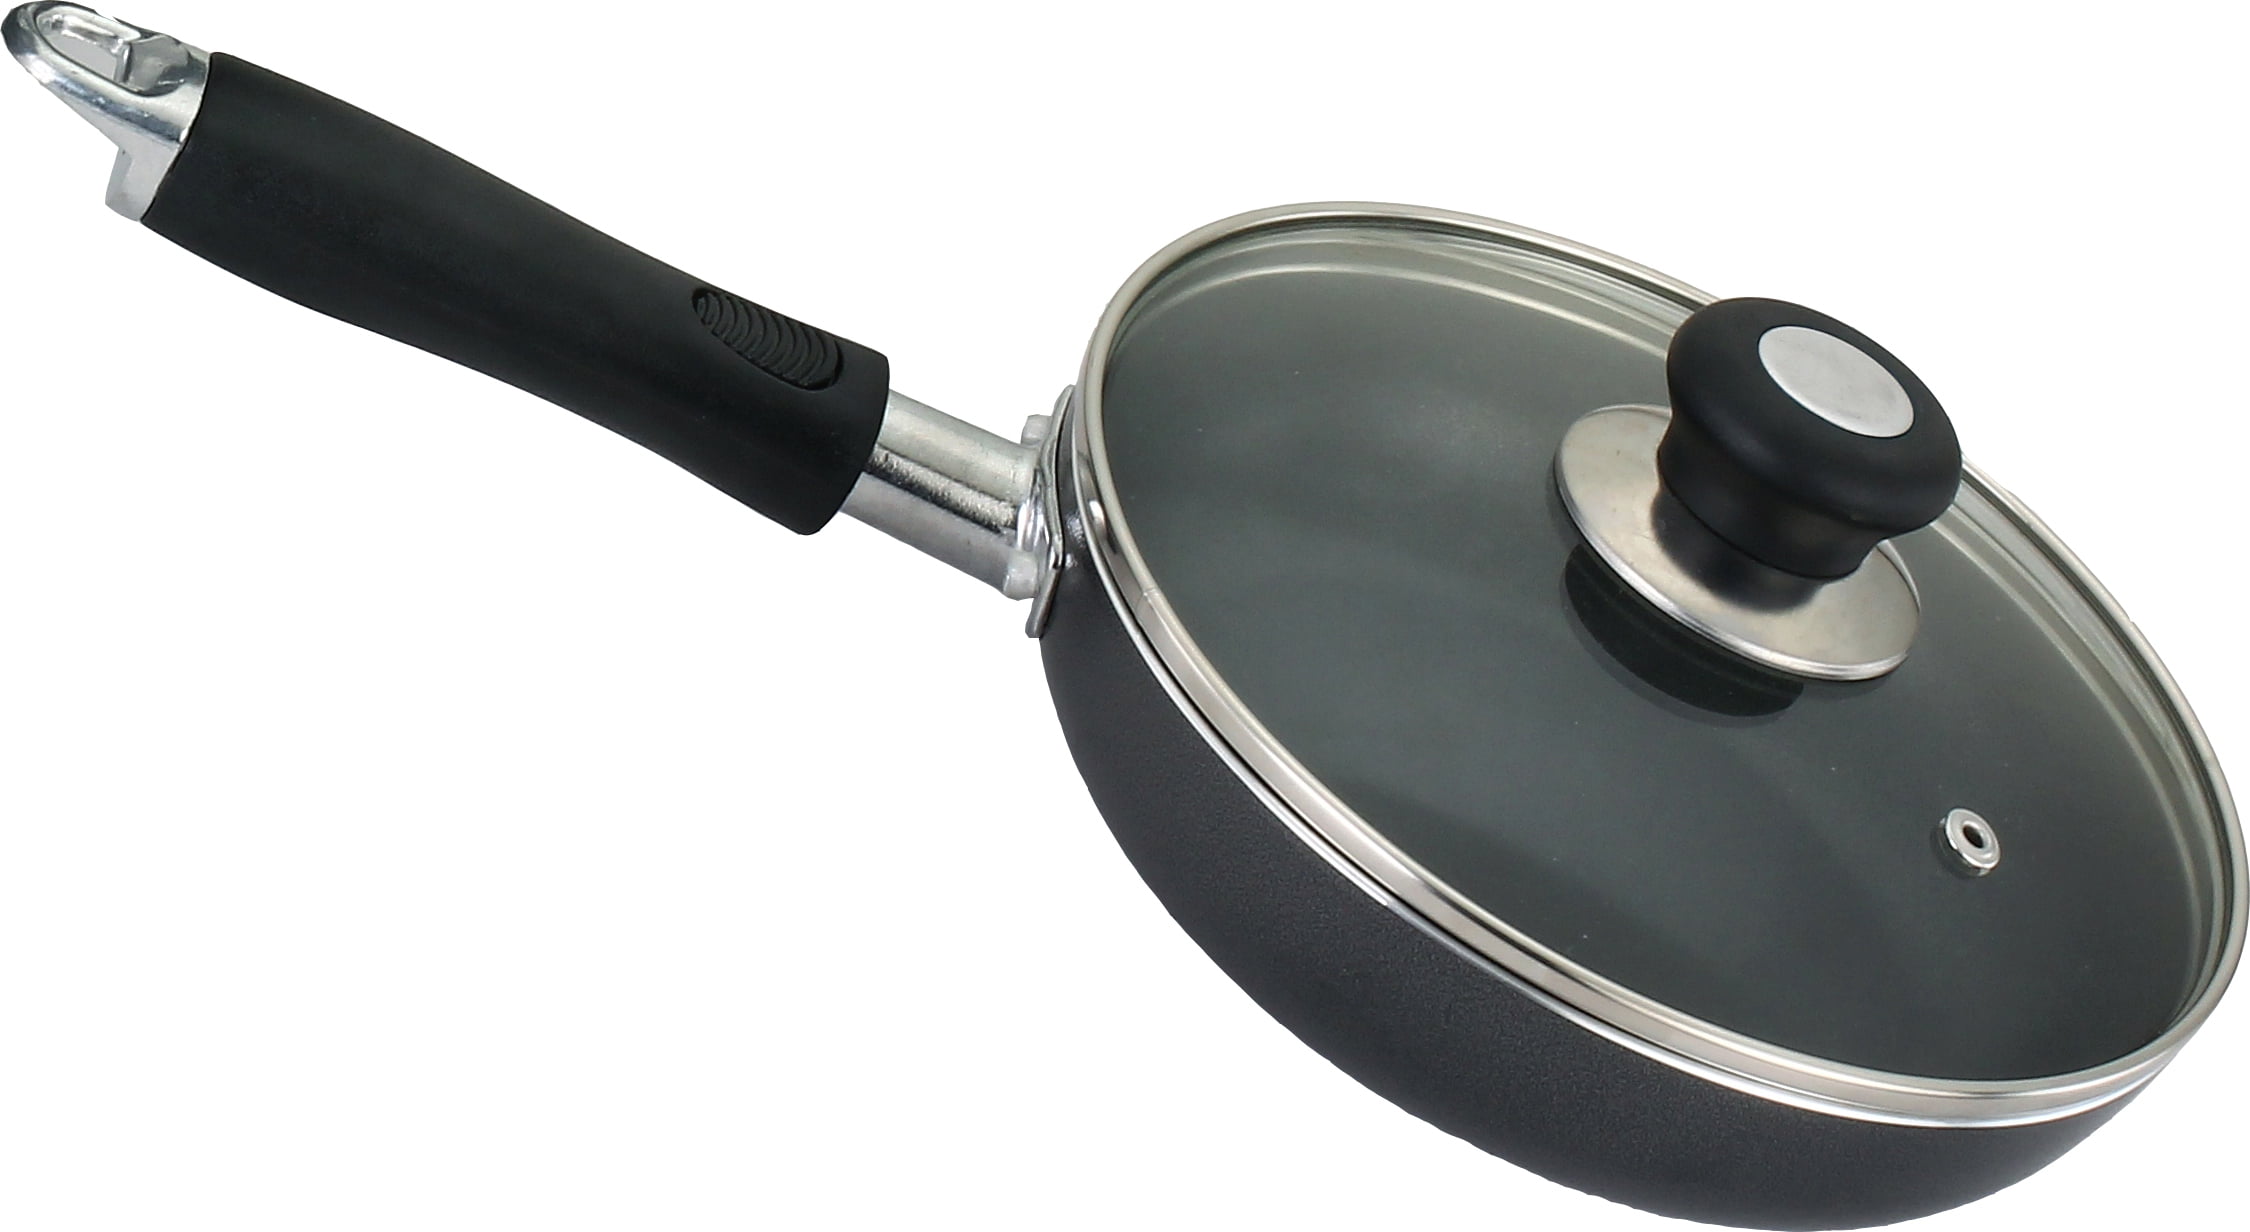 MICHELANGELO 11 Inch Nonstick Skillet with Lid,Non-Stick Deep Frying Pan with Lid,Nonstick Frying Pan with Soft Bakelite Handle,Stone Coating,100% Free of PFOA and PTFE Induction Compatible 